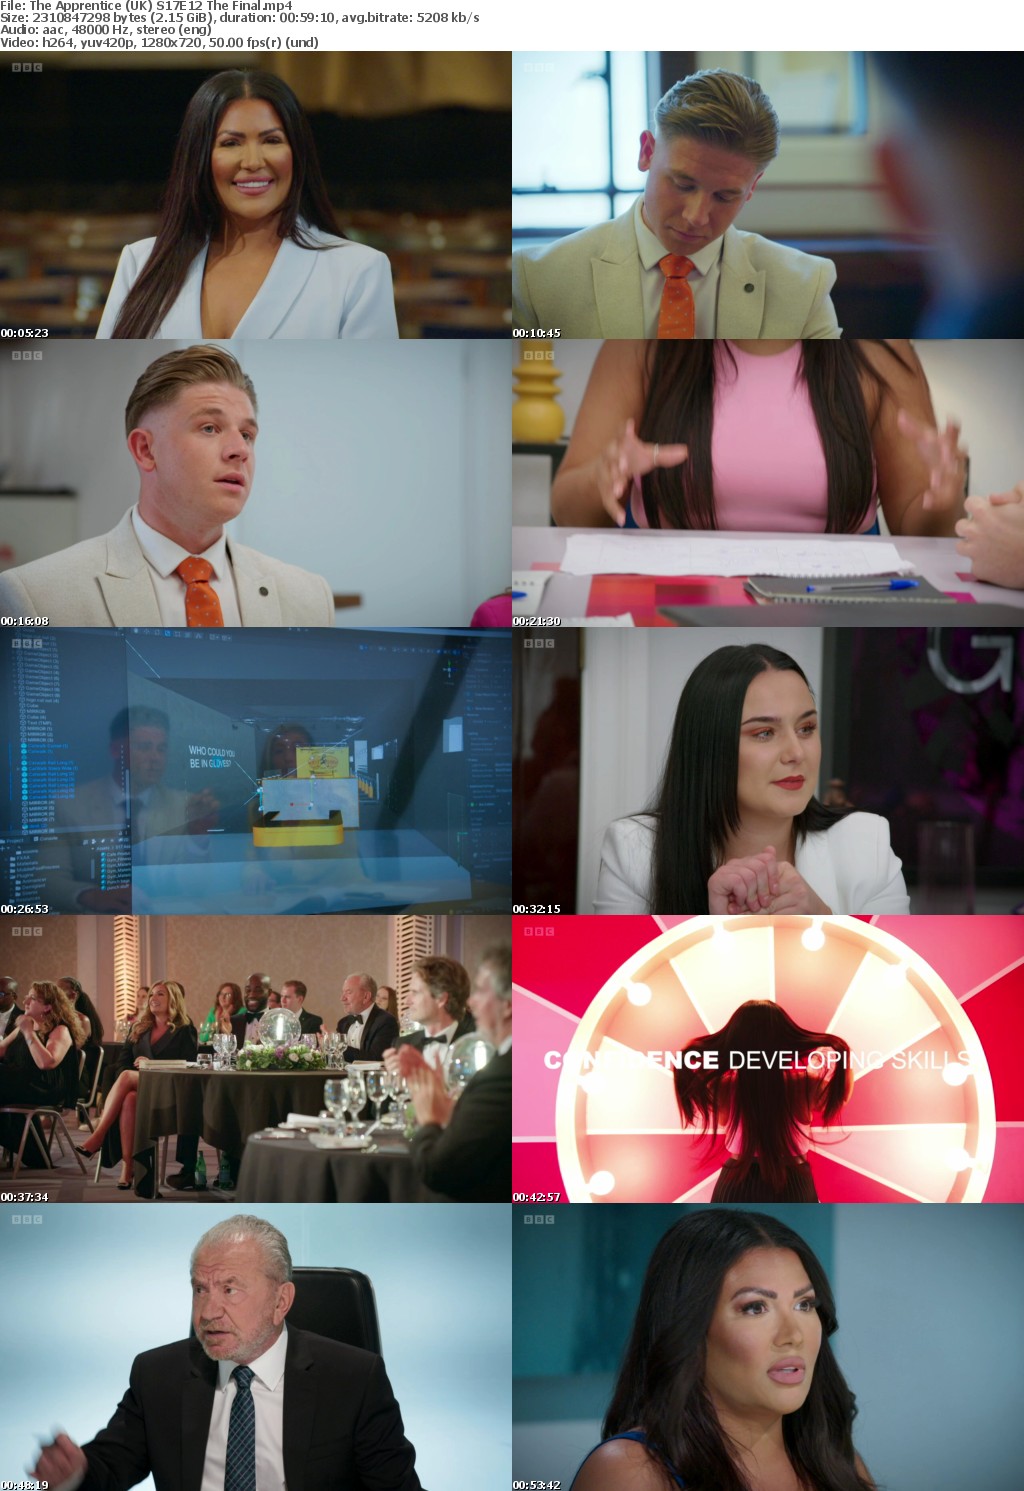 The Apprentice (UK) S17E12 The Final (1280x720p HD, 50fps, soft Eng subs)